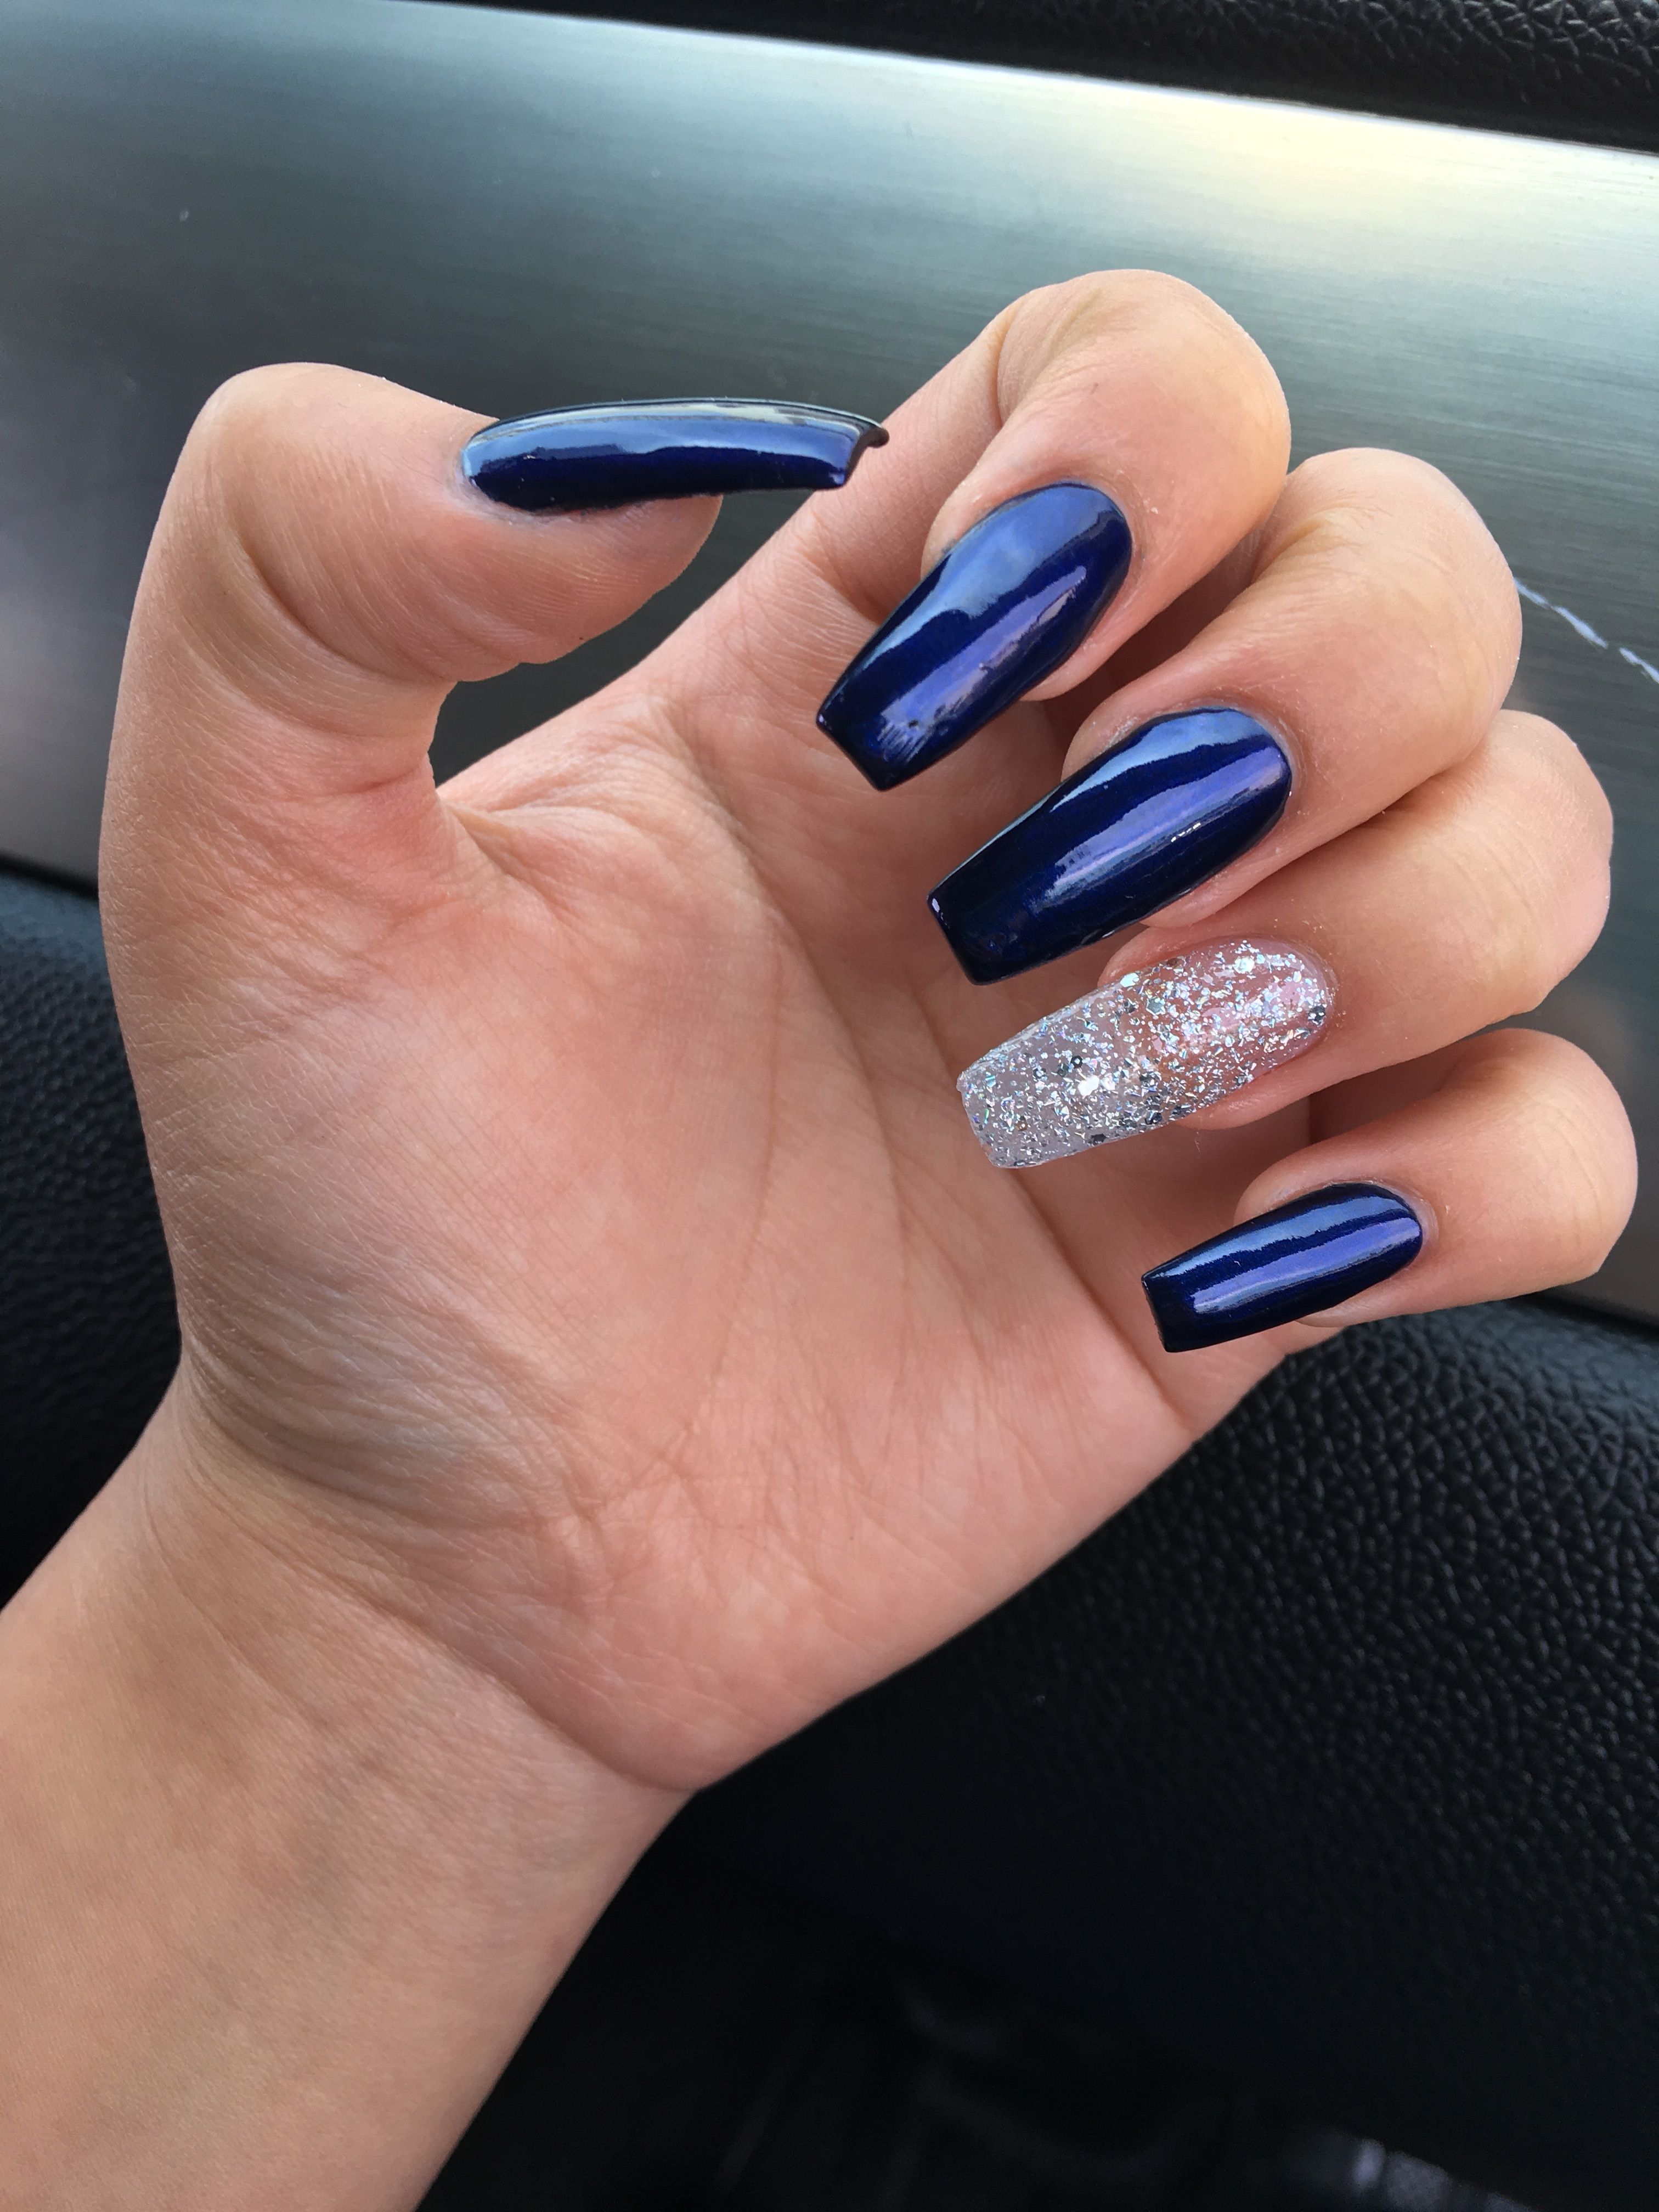 Navy blue nails | Prom | Pinterest | Navy blue nails, Blue nails and ...